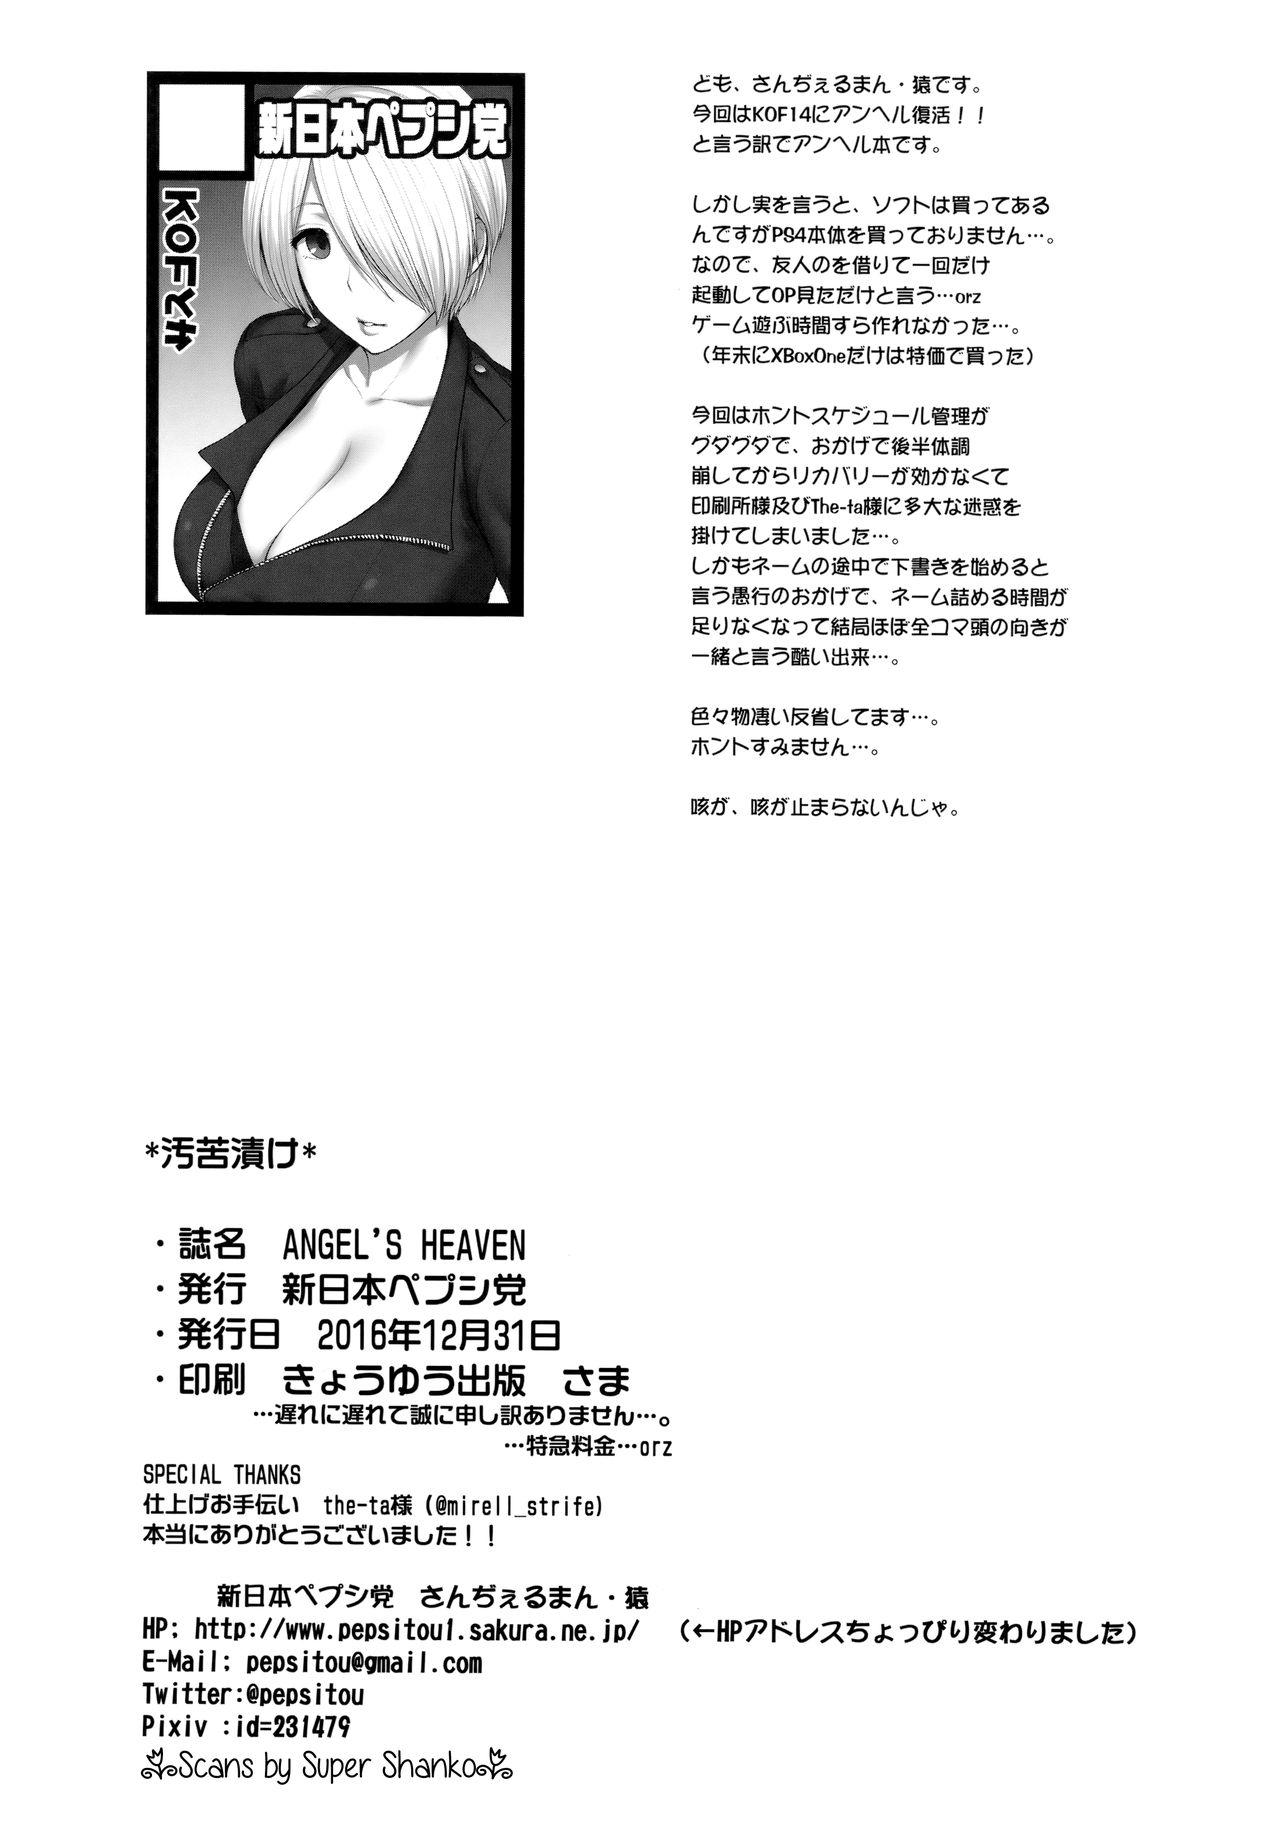 Asia ANGEL'S HEAVEN - King of fighters Blond - Page 21